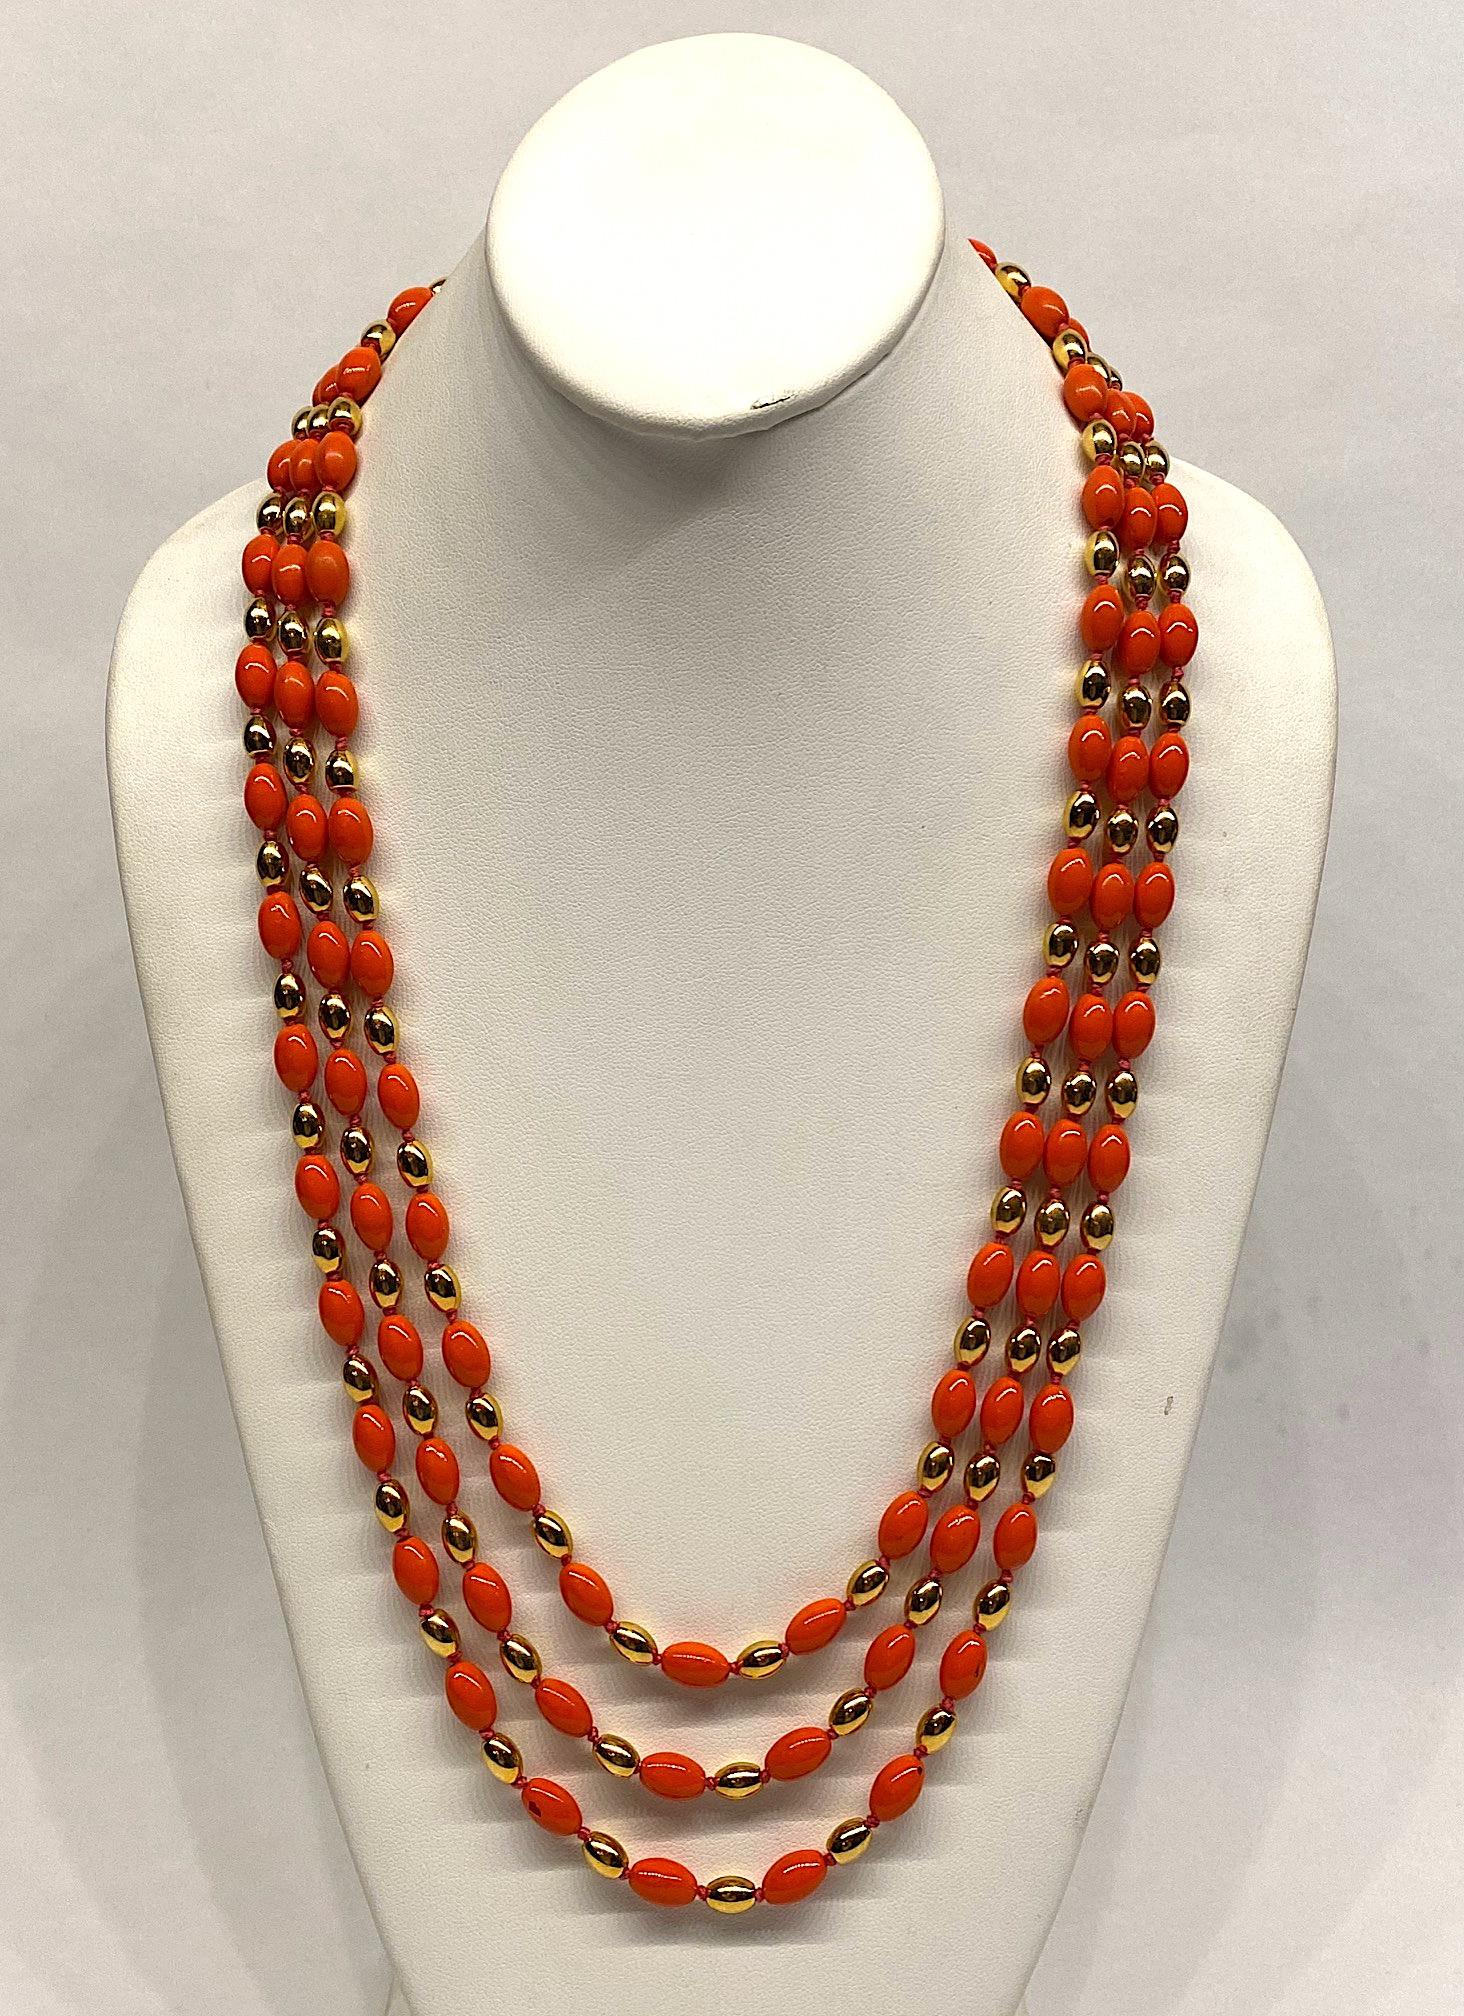 An elegant graduated bead necklace by Italian fashion jewelry company Vogue Bijoux. The stylized letter type on the clasp and orange color date the necklace to the late 1970s to mid 1980s. The three strands are comprised of individually knotted